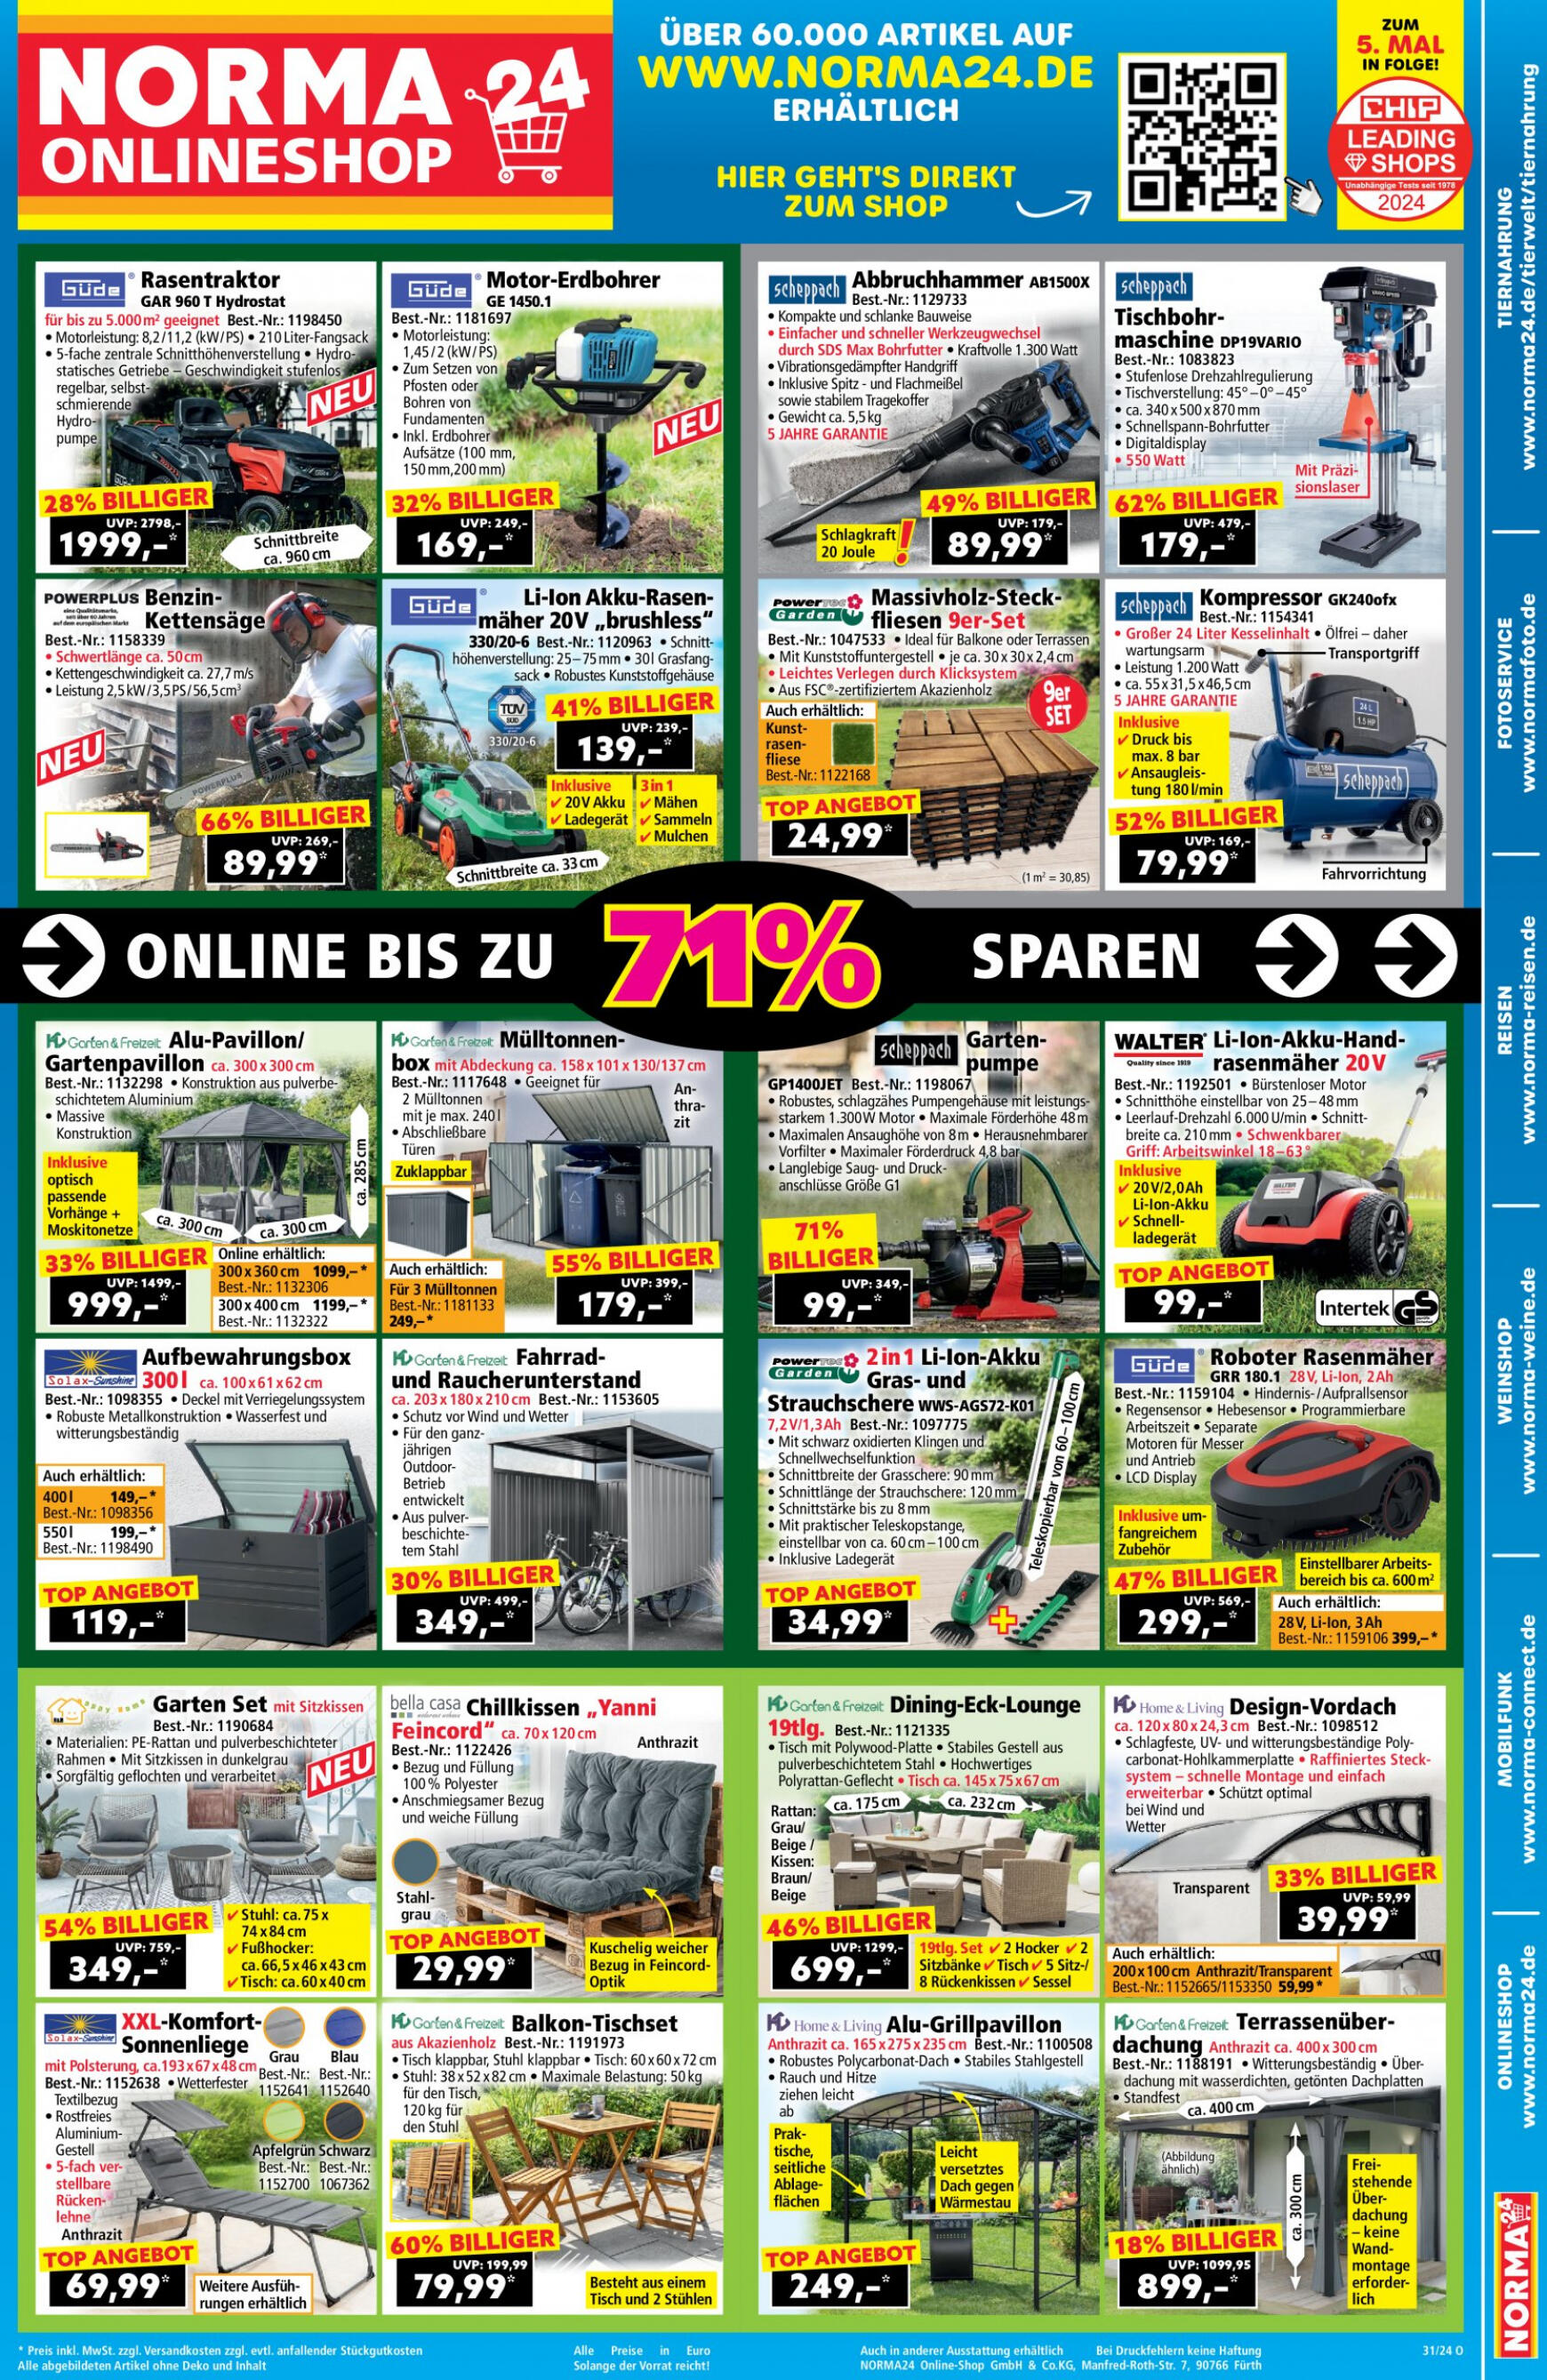 norma - Flyer Norma24 - Onlineshop aktuell 29.07. - 04.08.